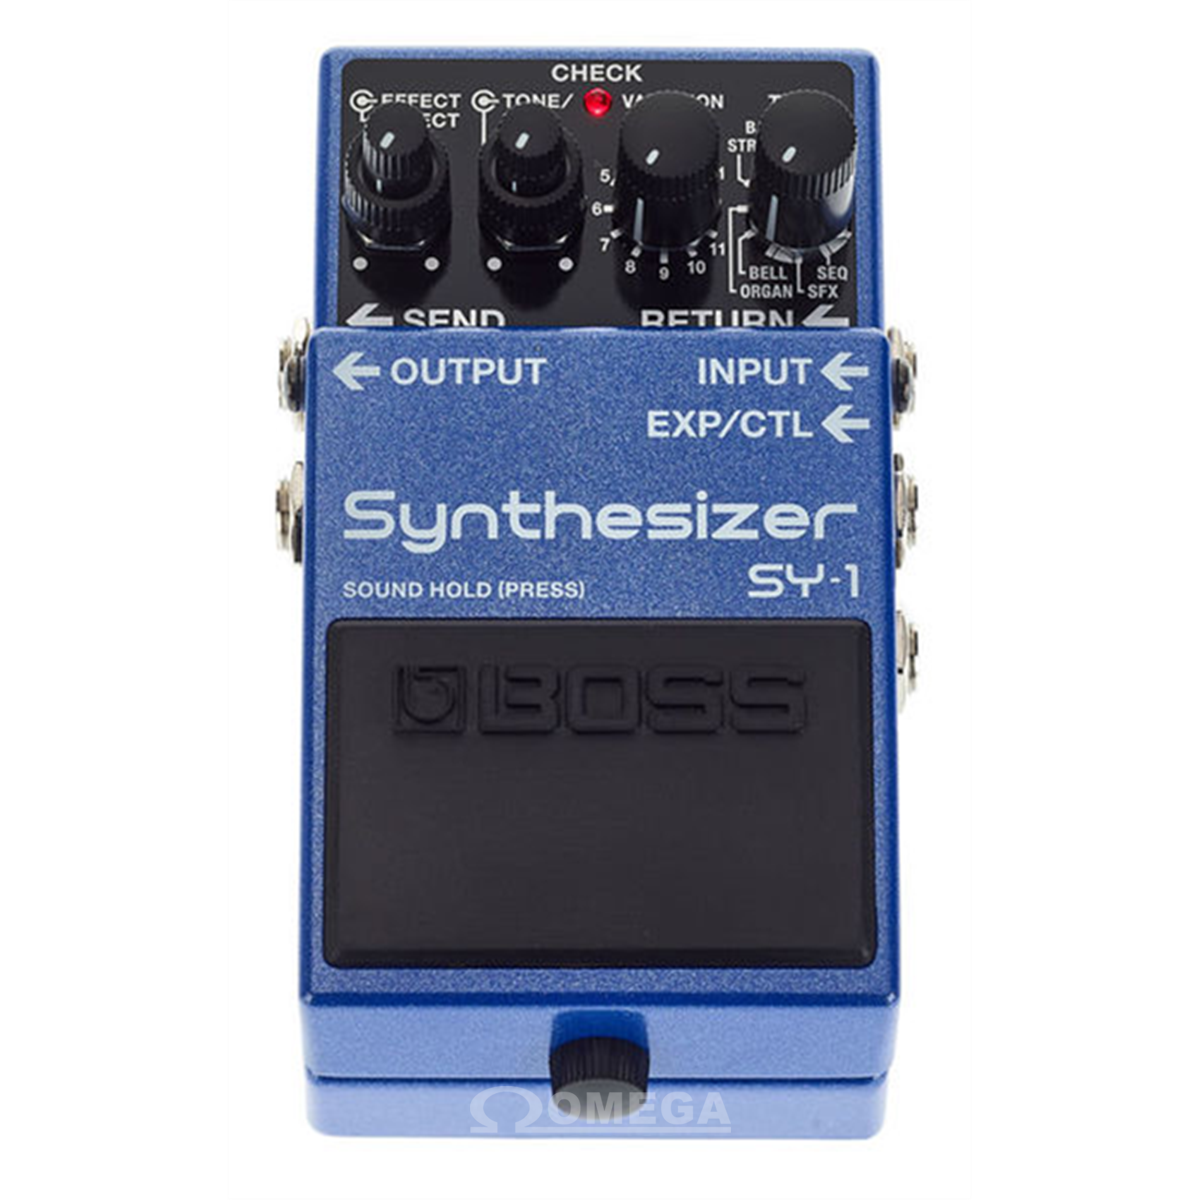 BOSS SY-1 Synthetiseur